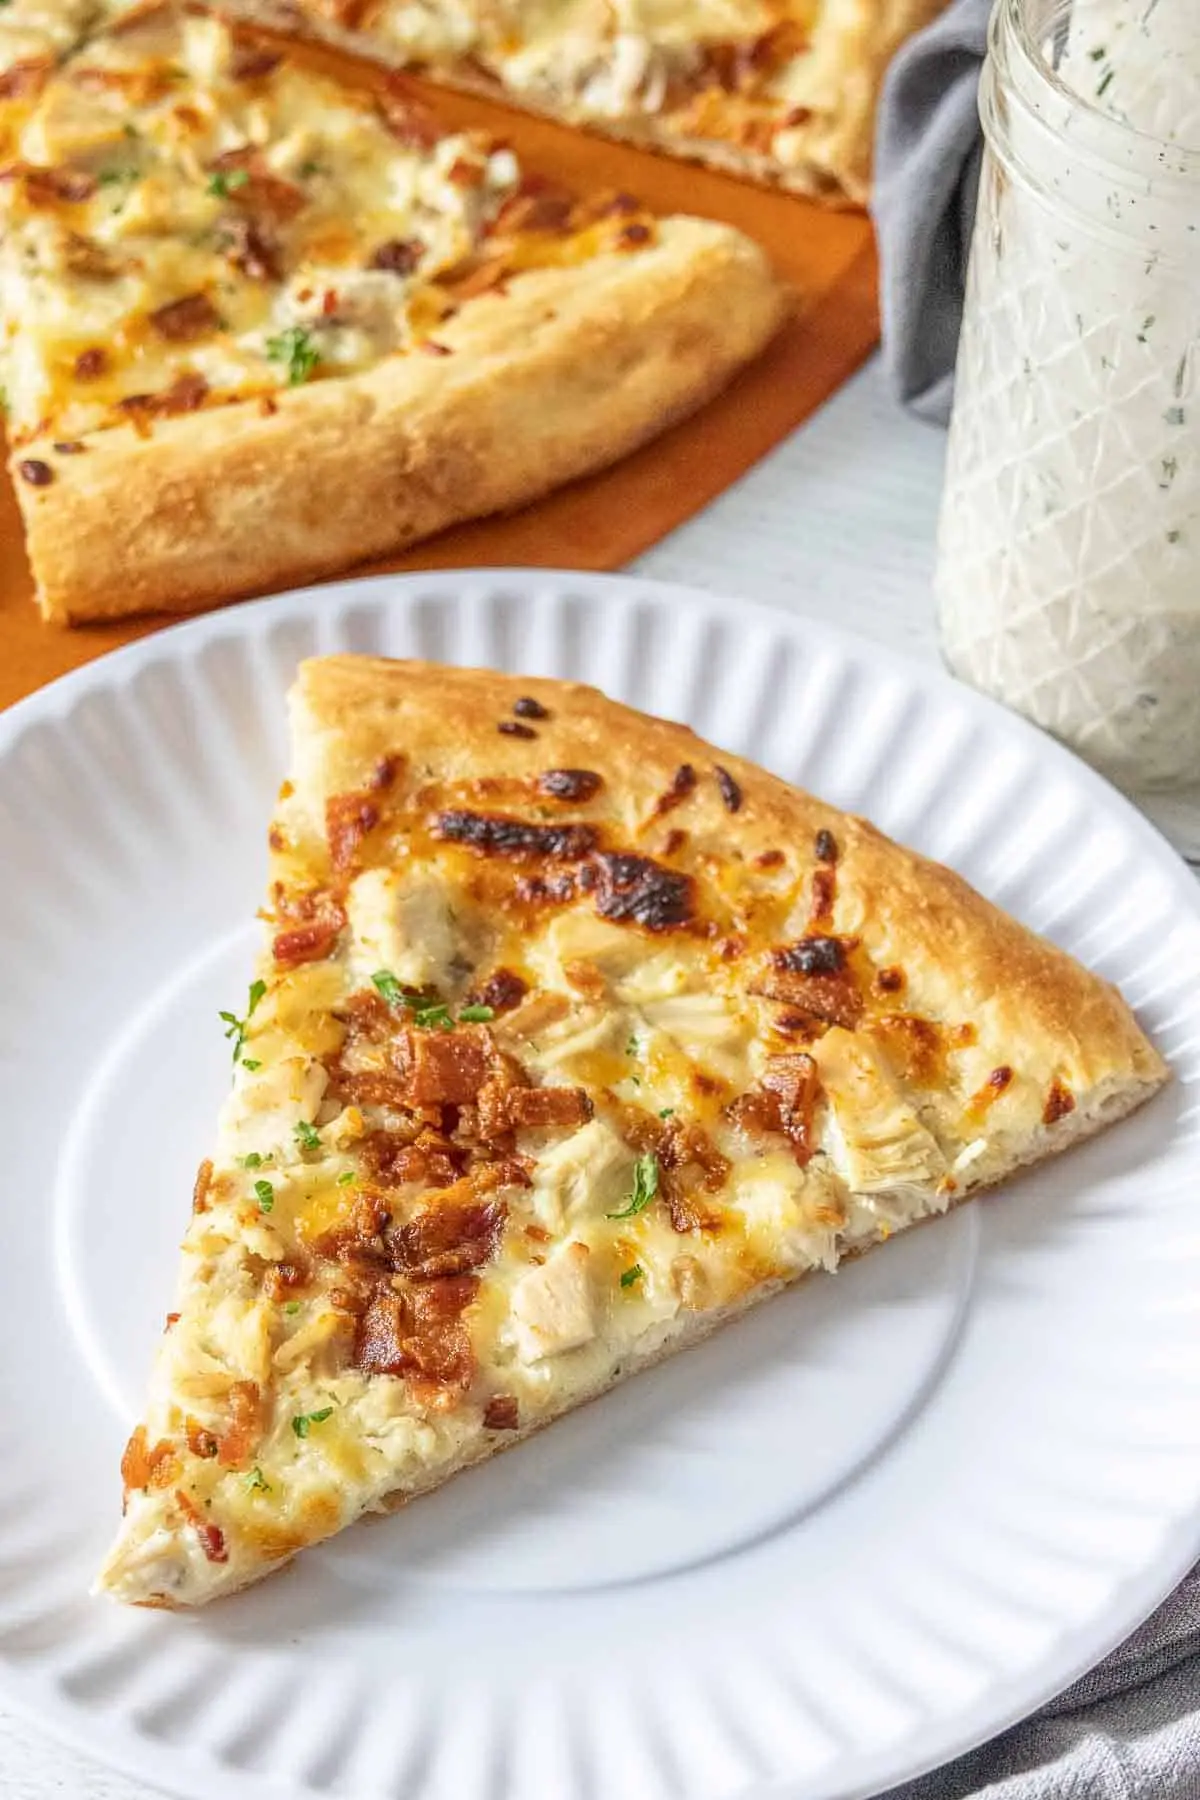 chicken ranch pizza - What is chicken bacon ranch pizza made of